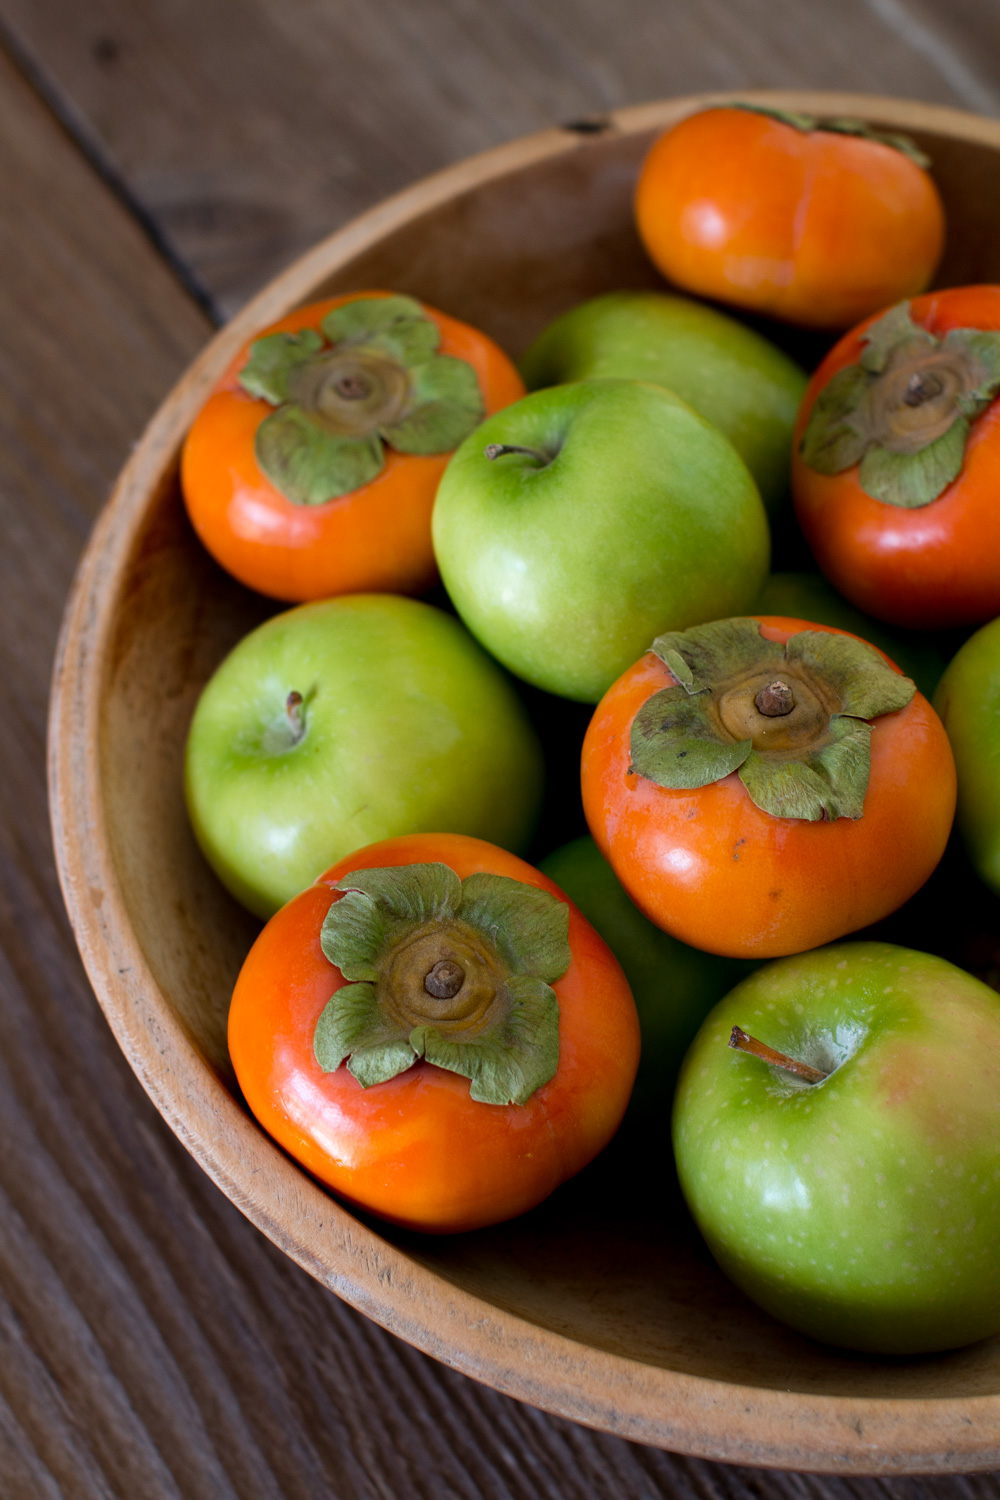 Apples and Persimmons